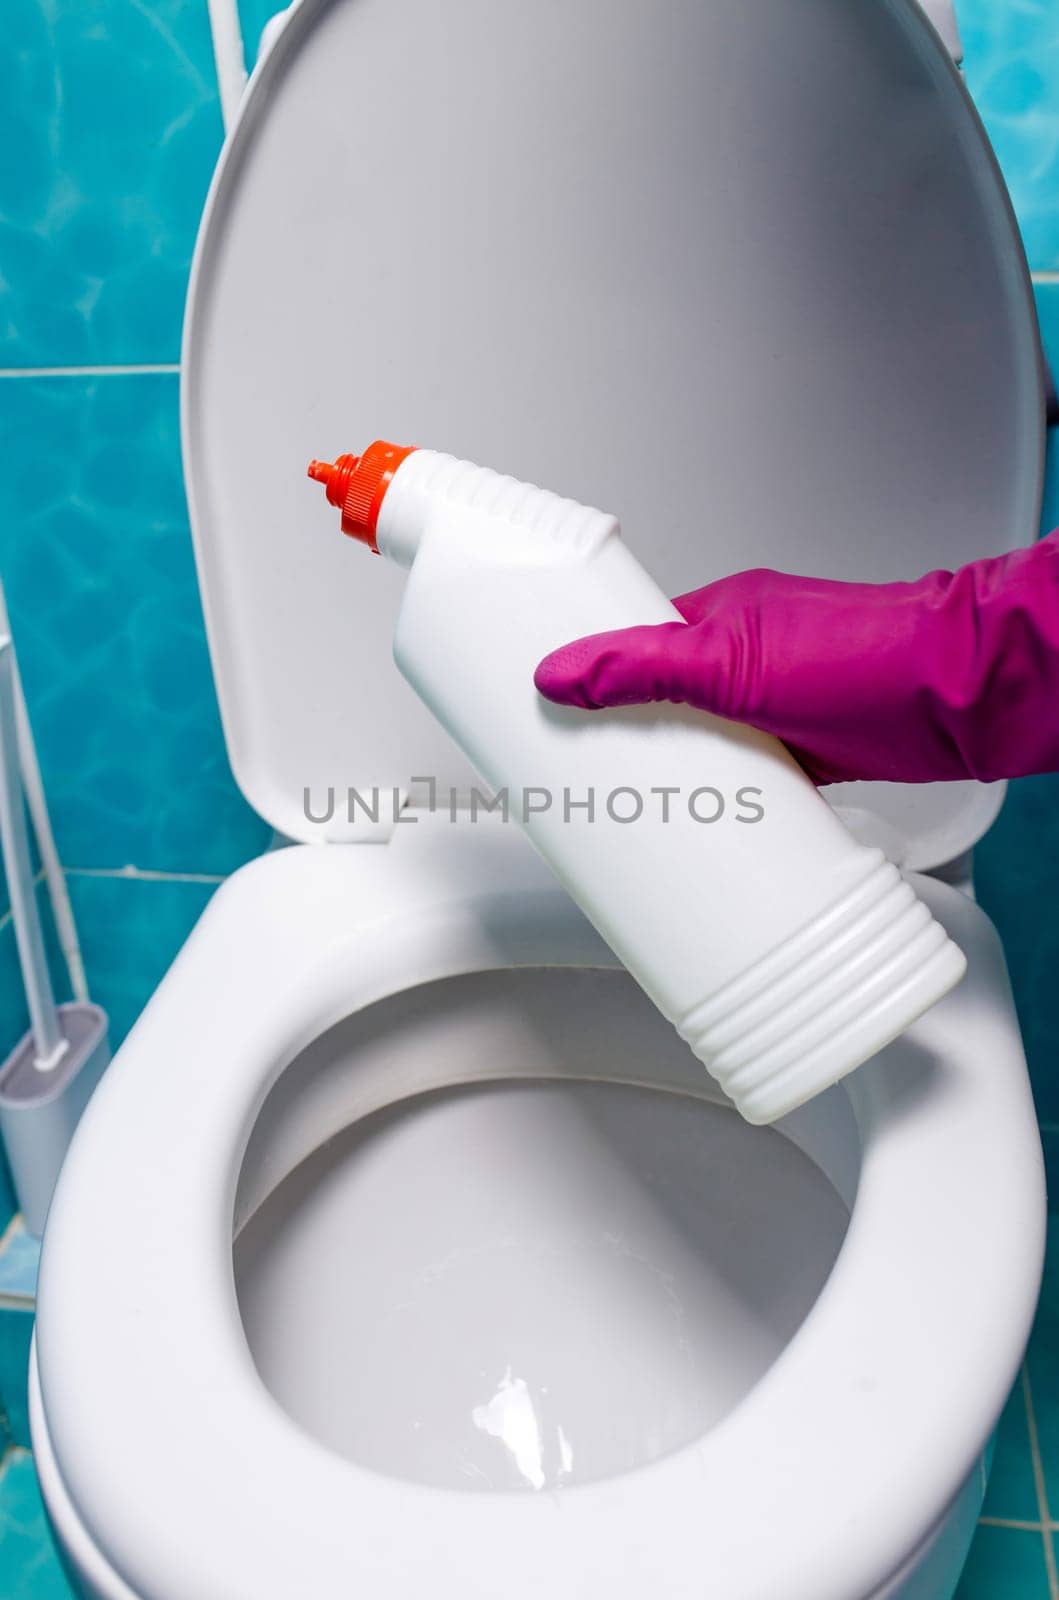 A hand wearing a pink glove carefully pours toilet cleaner from a bottle into the open toilet bowl, ensuring thorough cleaning.